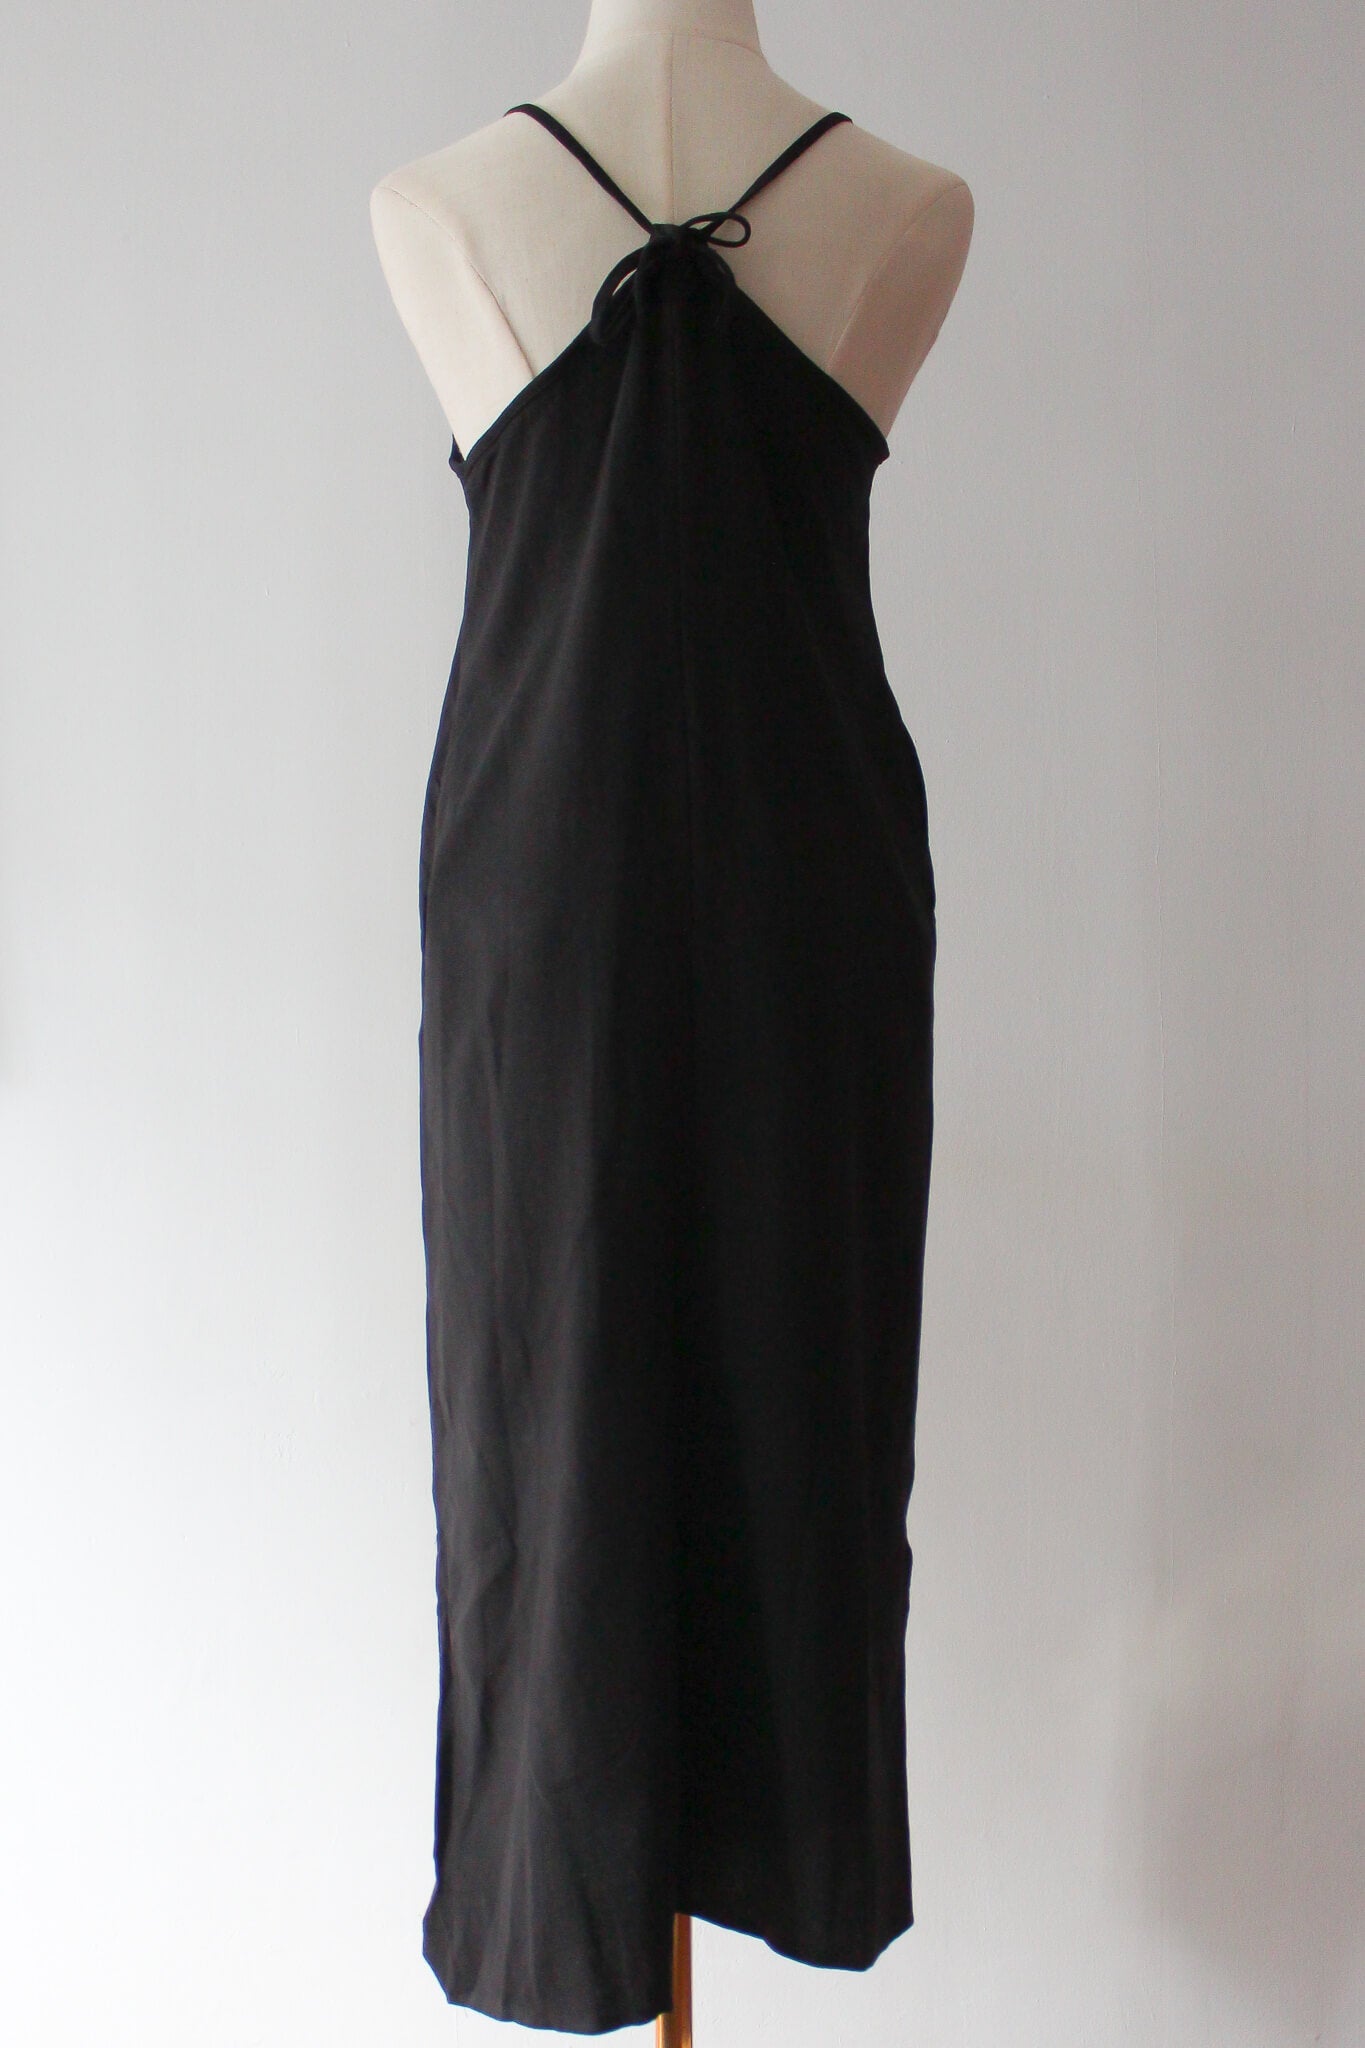 Casual cotton midi dress with pockets. Perfect for minimalists 